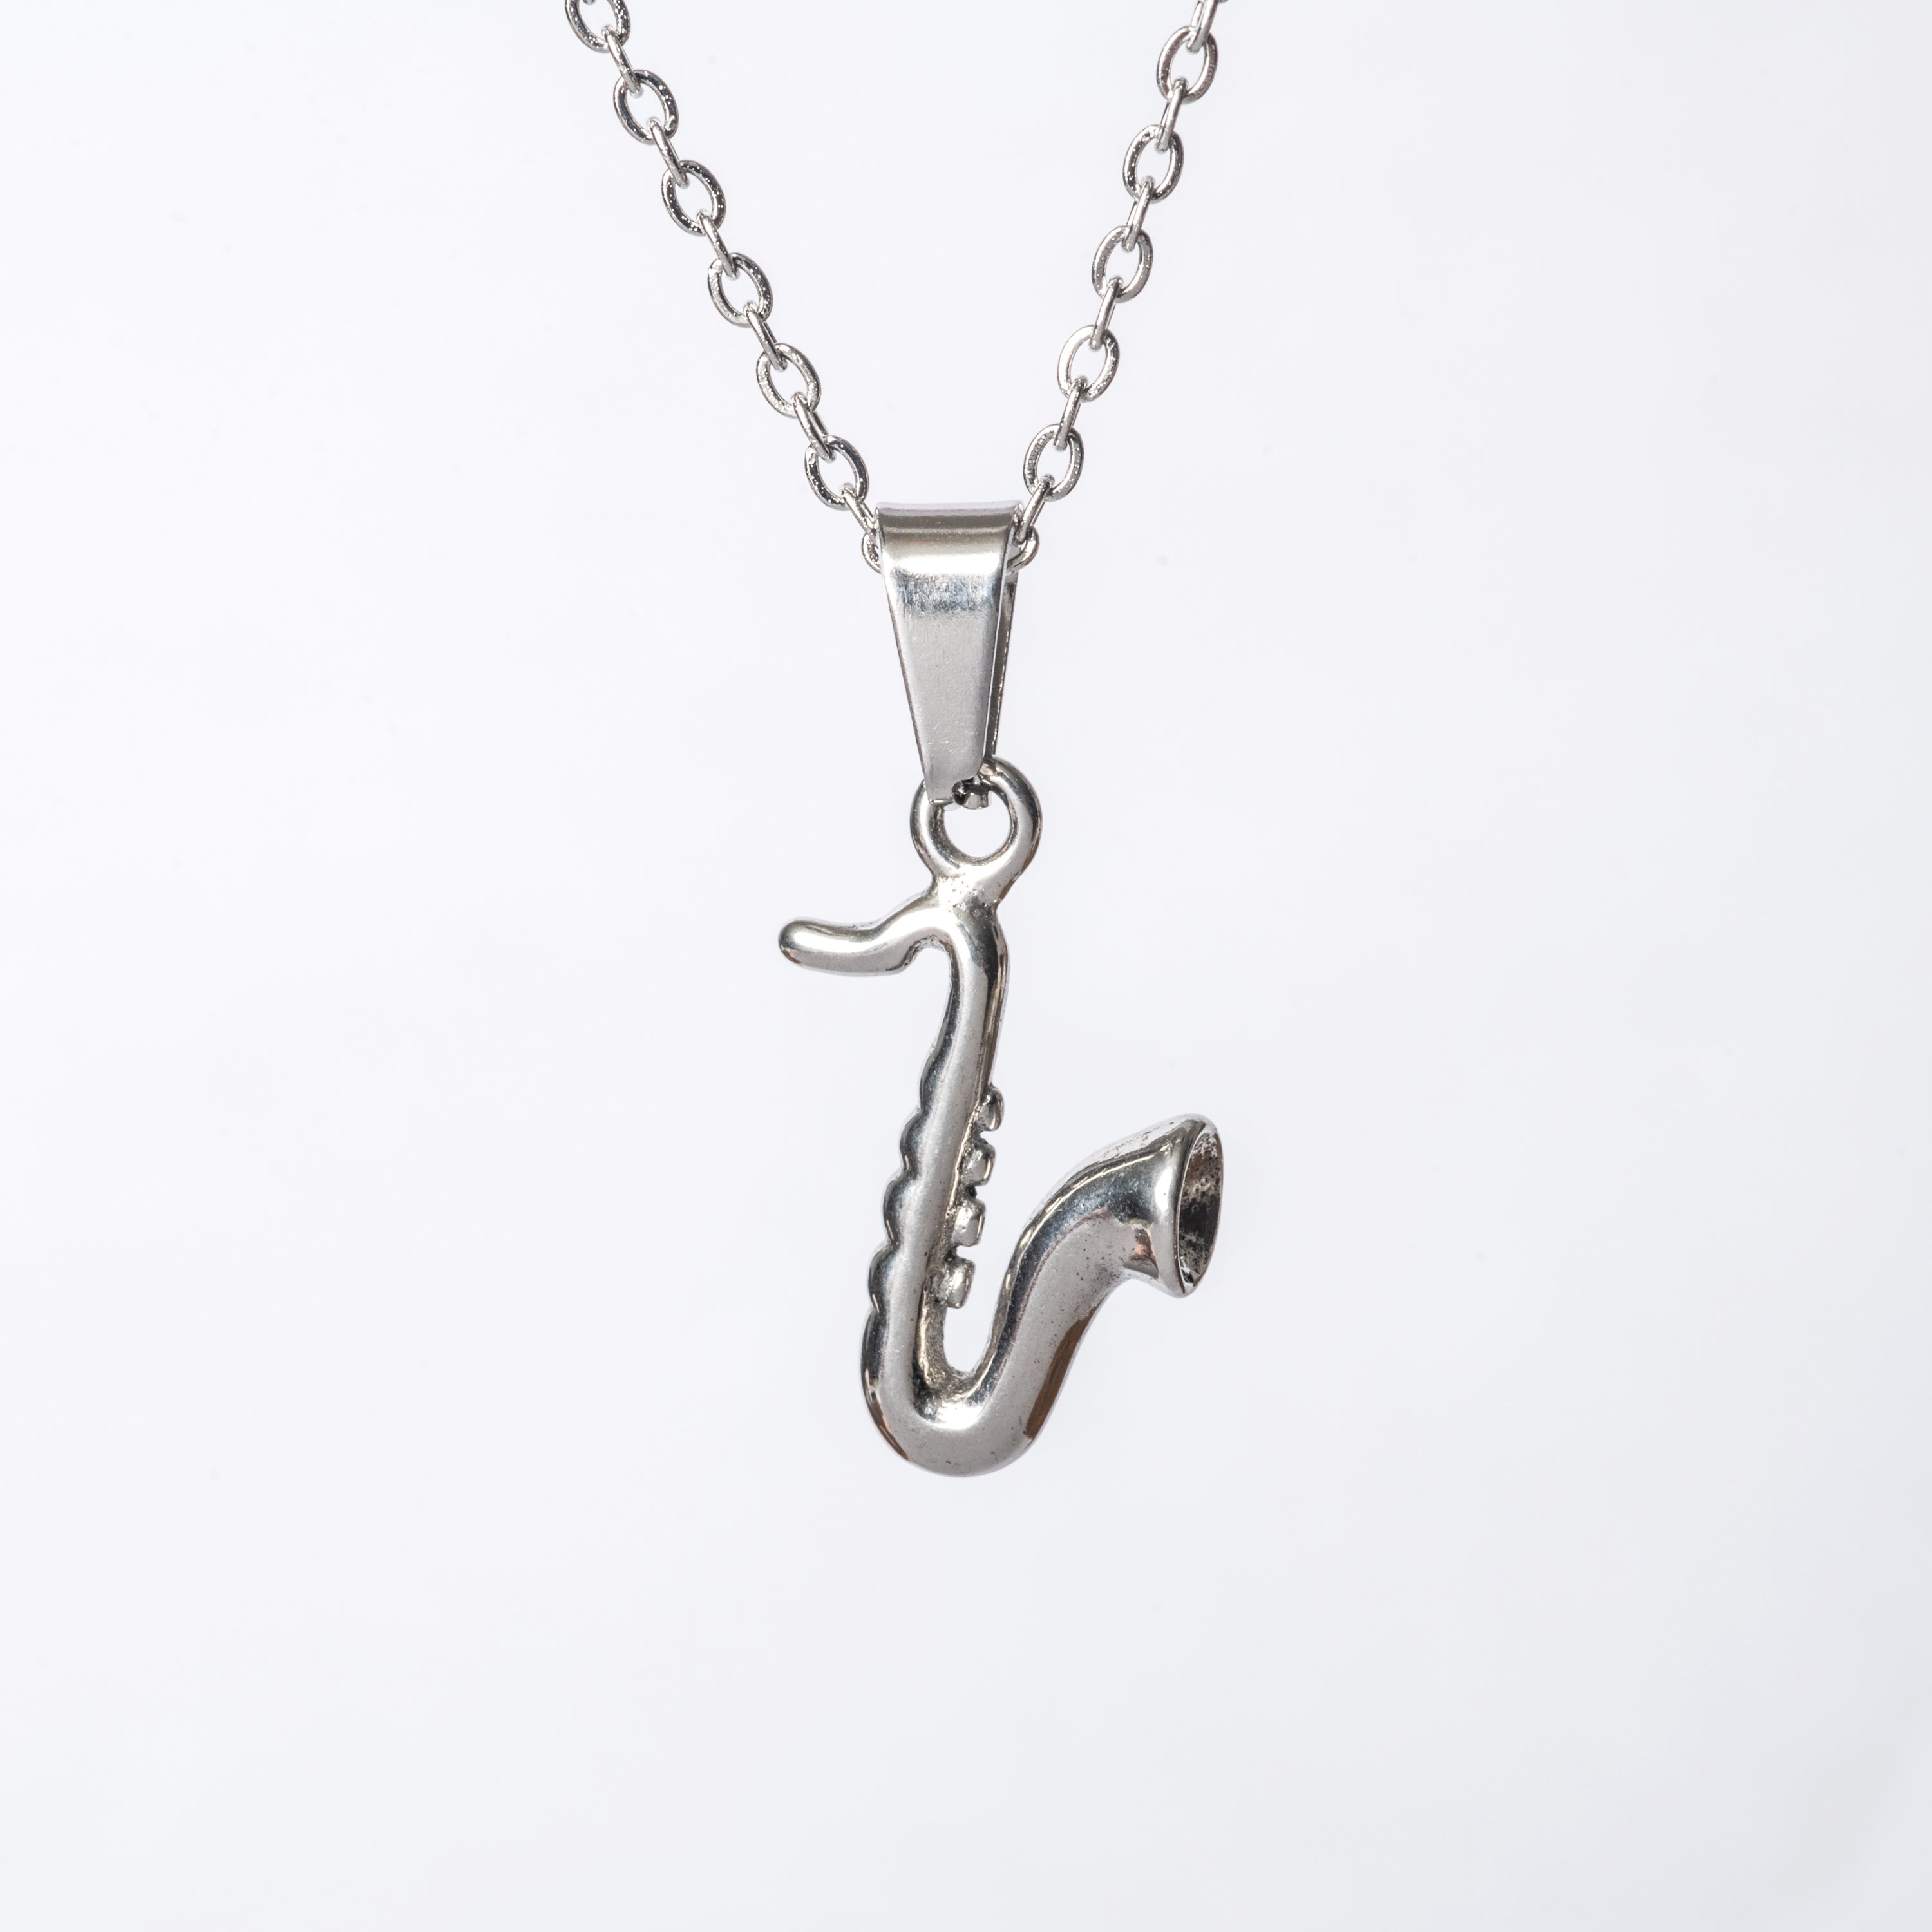 The Musician Necklace